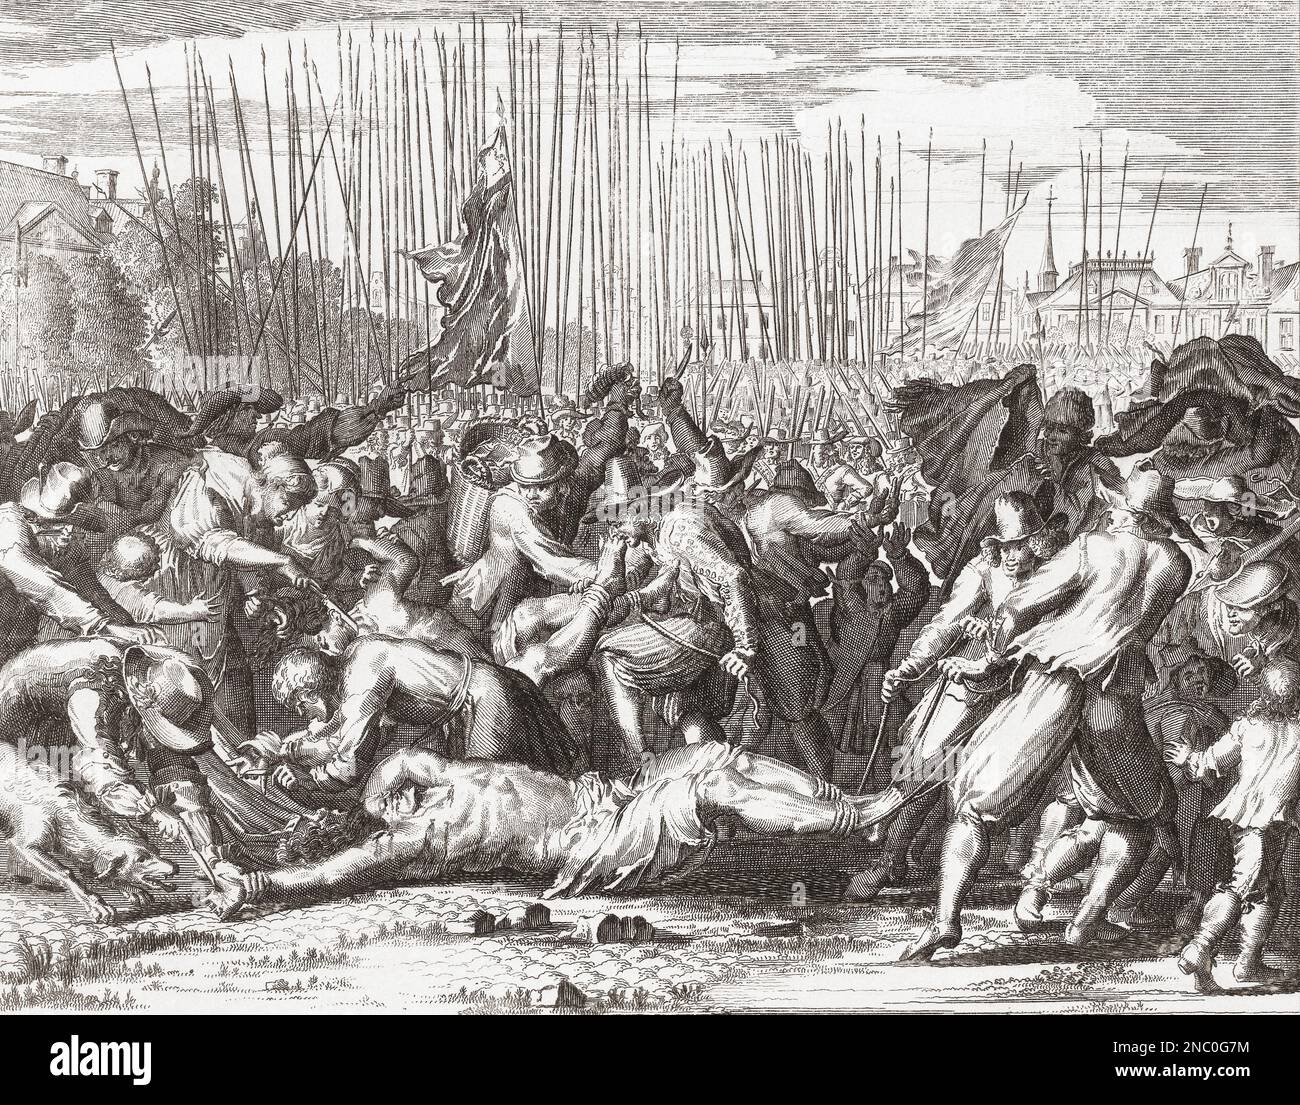 The murder of the De Witt brothers, Johan and Cornelis, August 20, 1623.  The brothers were lynched by supporters of William of Orange on August 20, 1672.  From an engraving by Romeyn de Hooghe. Stock Photo